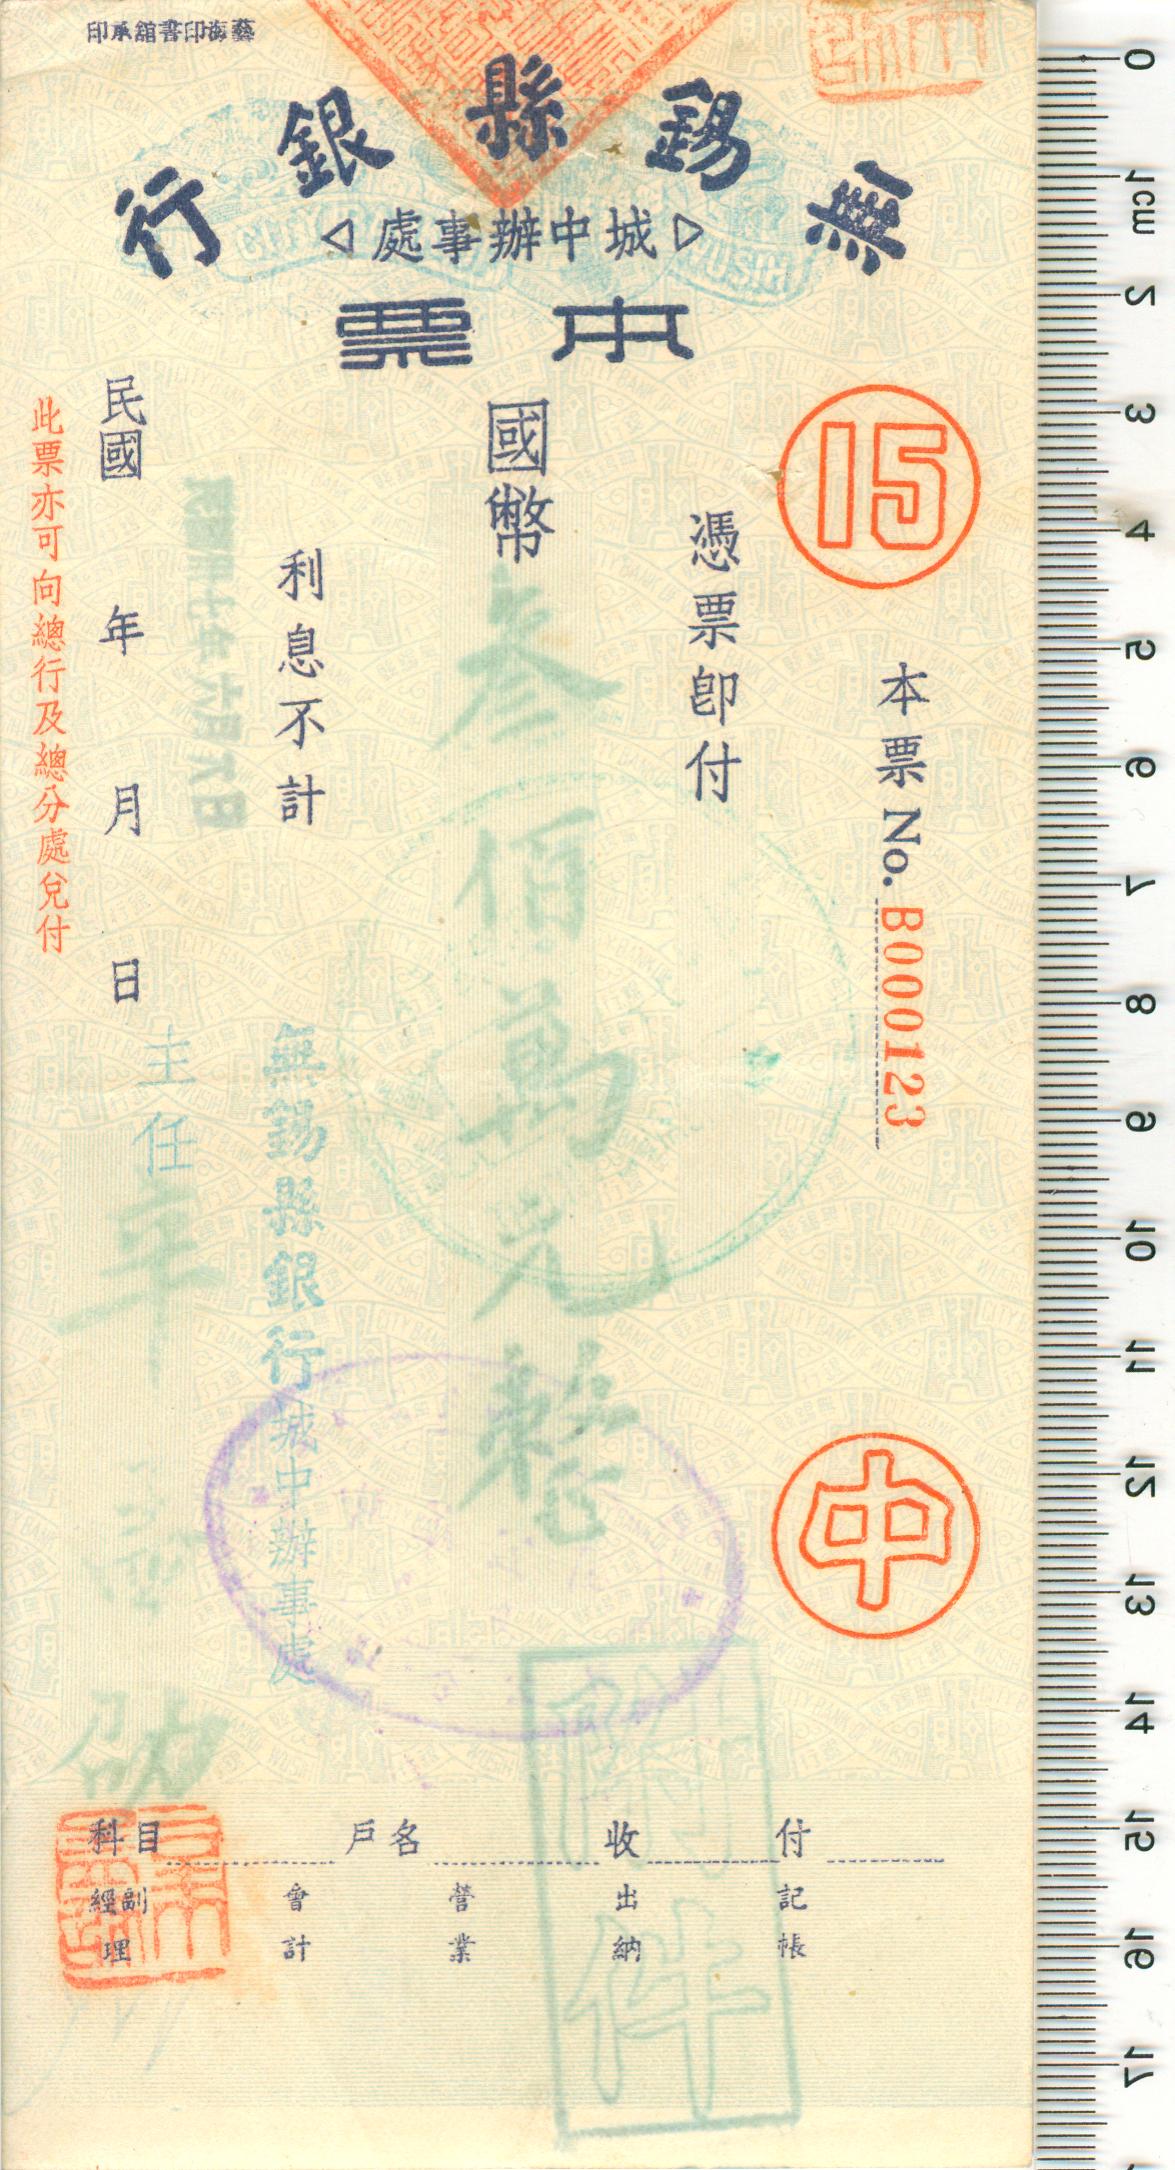 D1721, Check of Wuxi County Bank, China 1948 Cheque